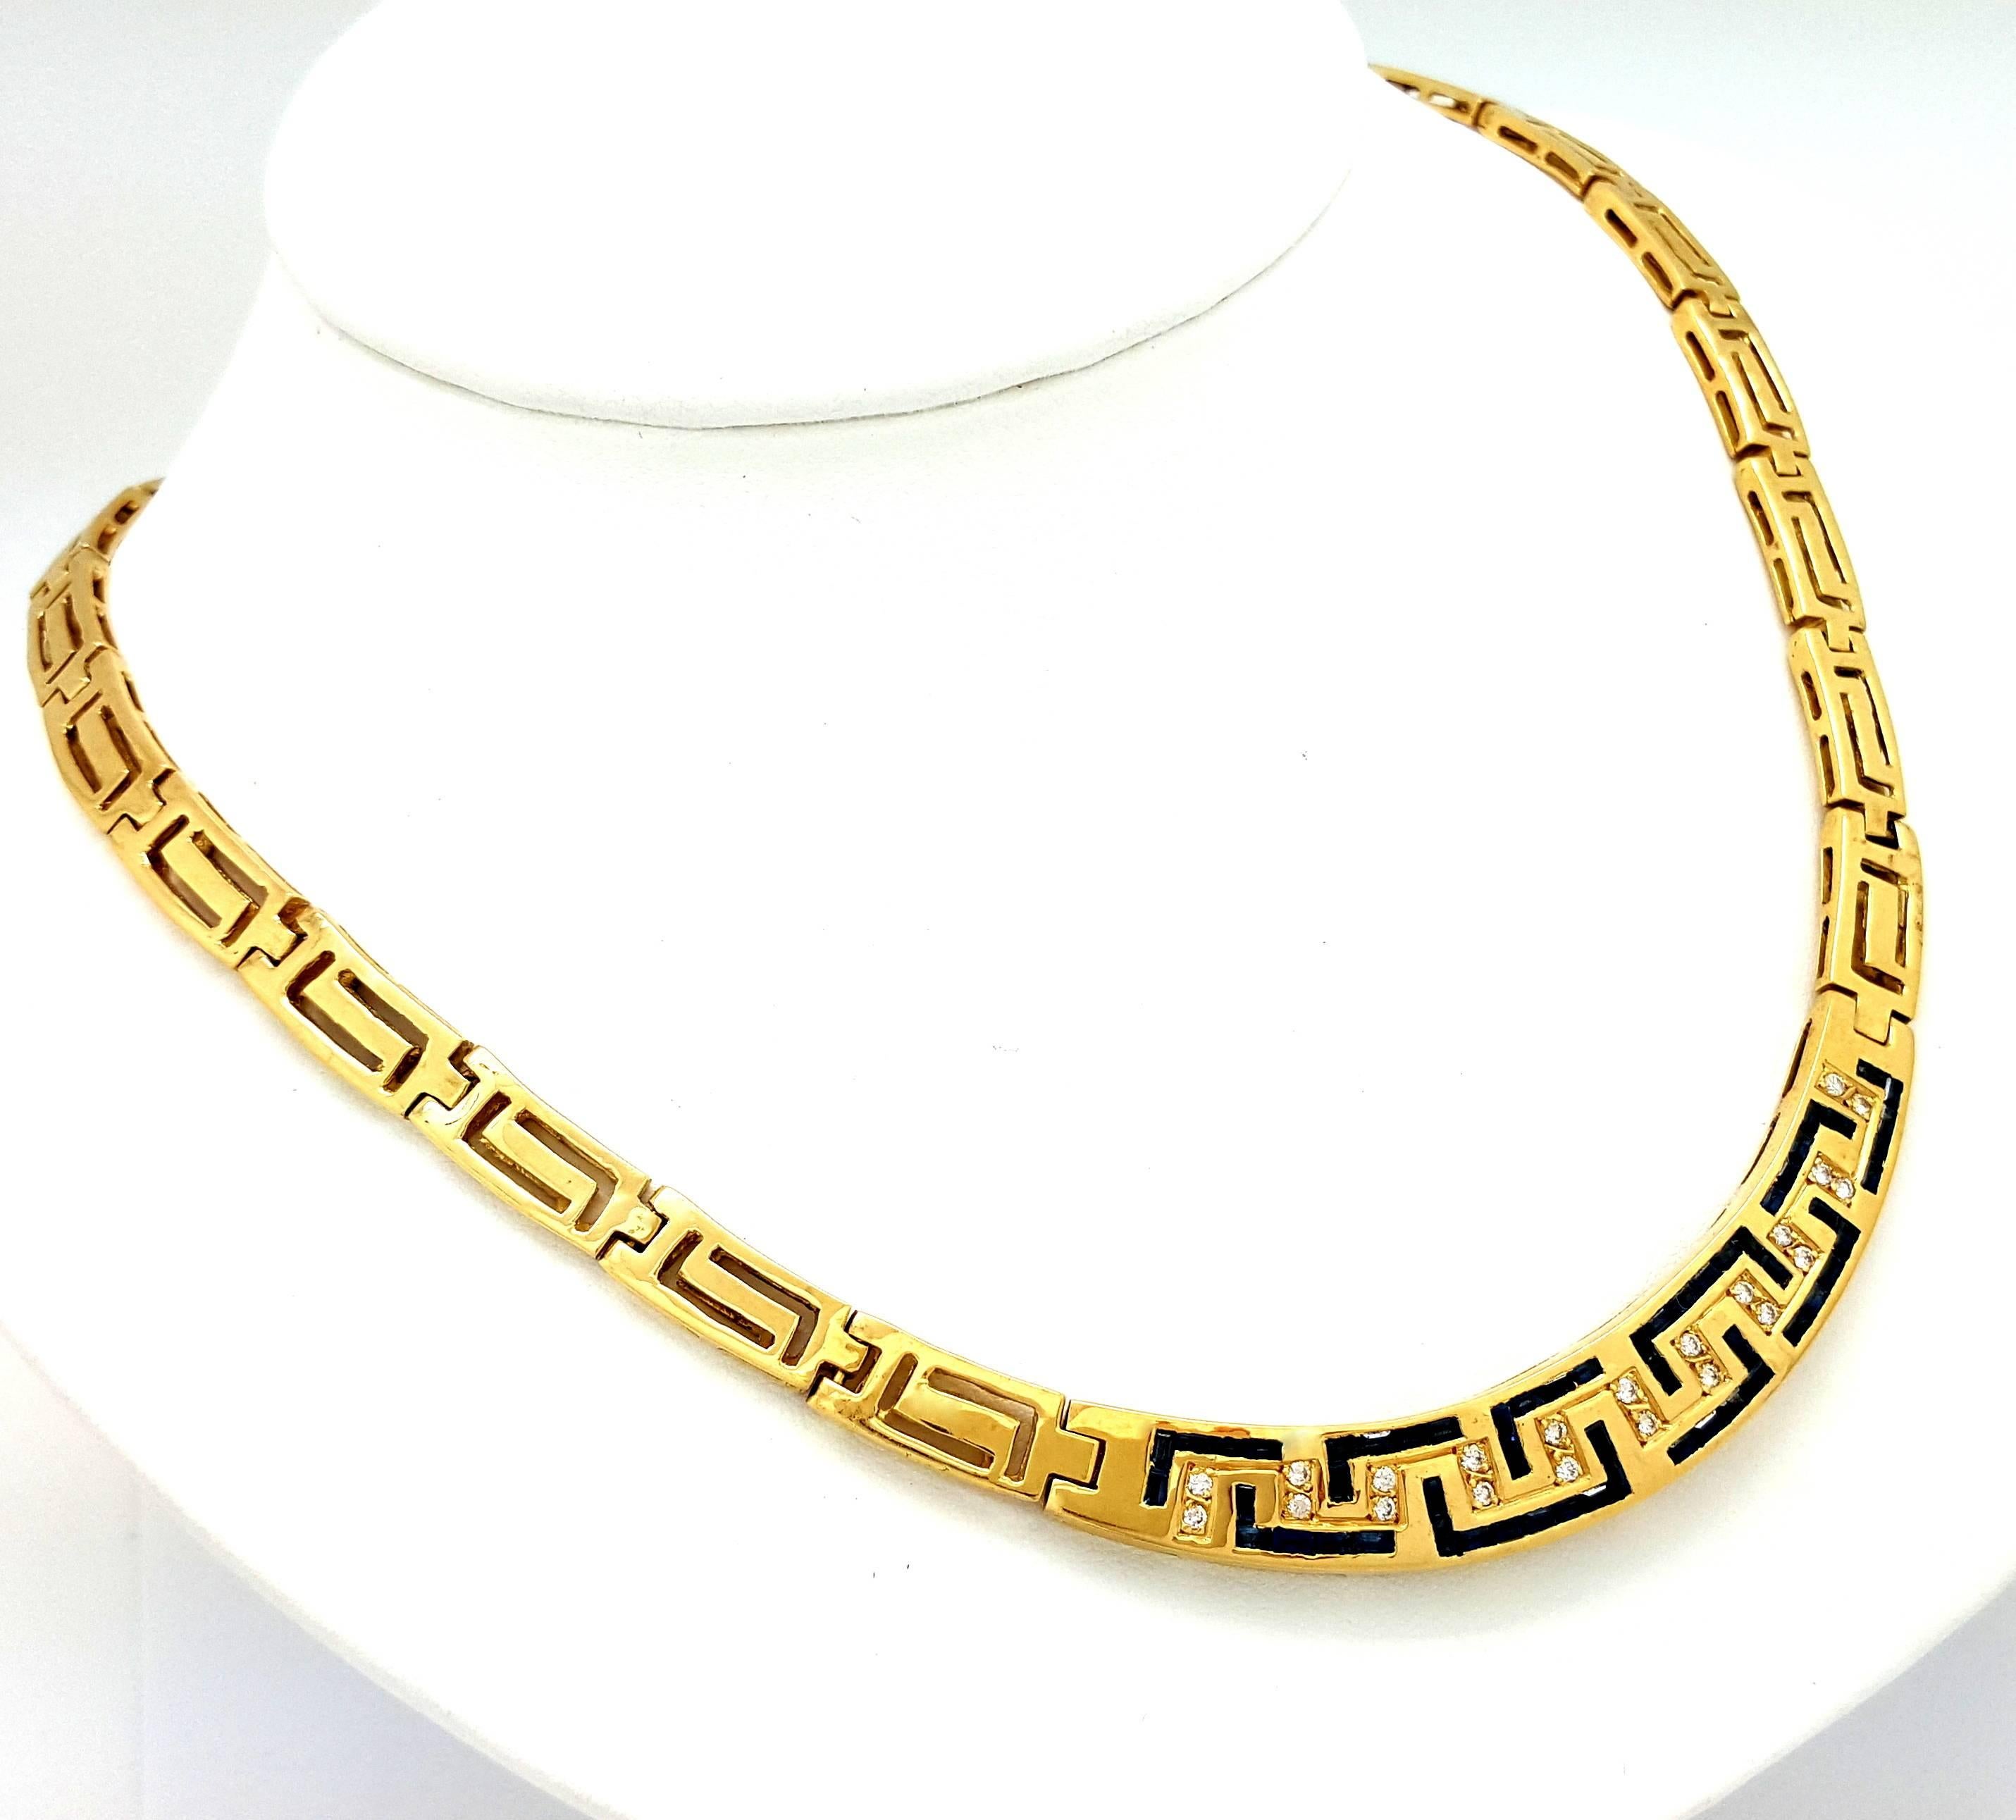 This fabulous collar necklace is made in solid 18k yellow gold. It features both round diamonds and square-cut blue sapphires. The diamonds have a total weight of 0.44ct, and they are graded G-H in color and VS in clarity. The collar measures 12mm